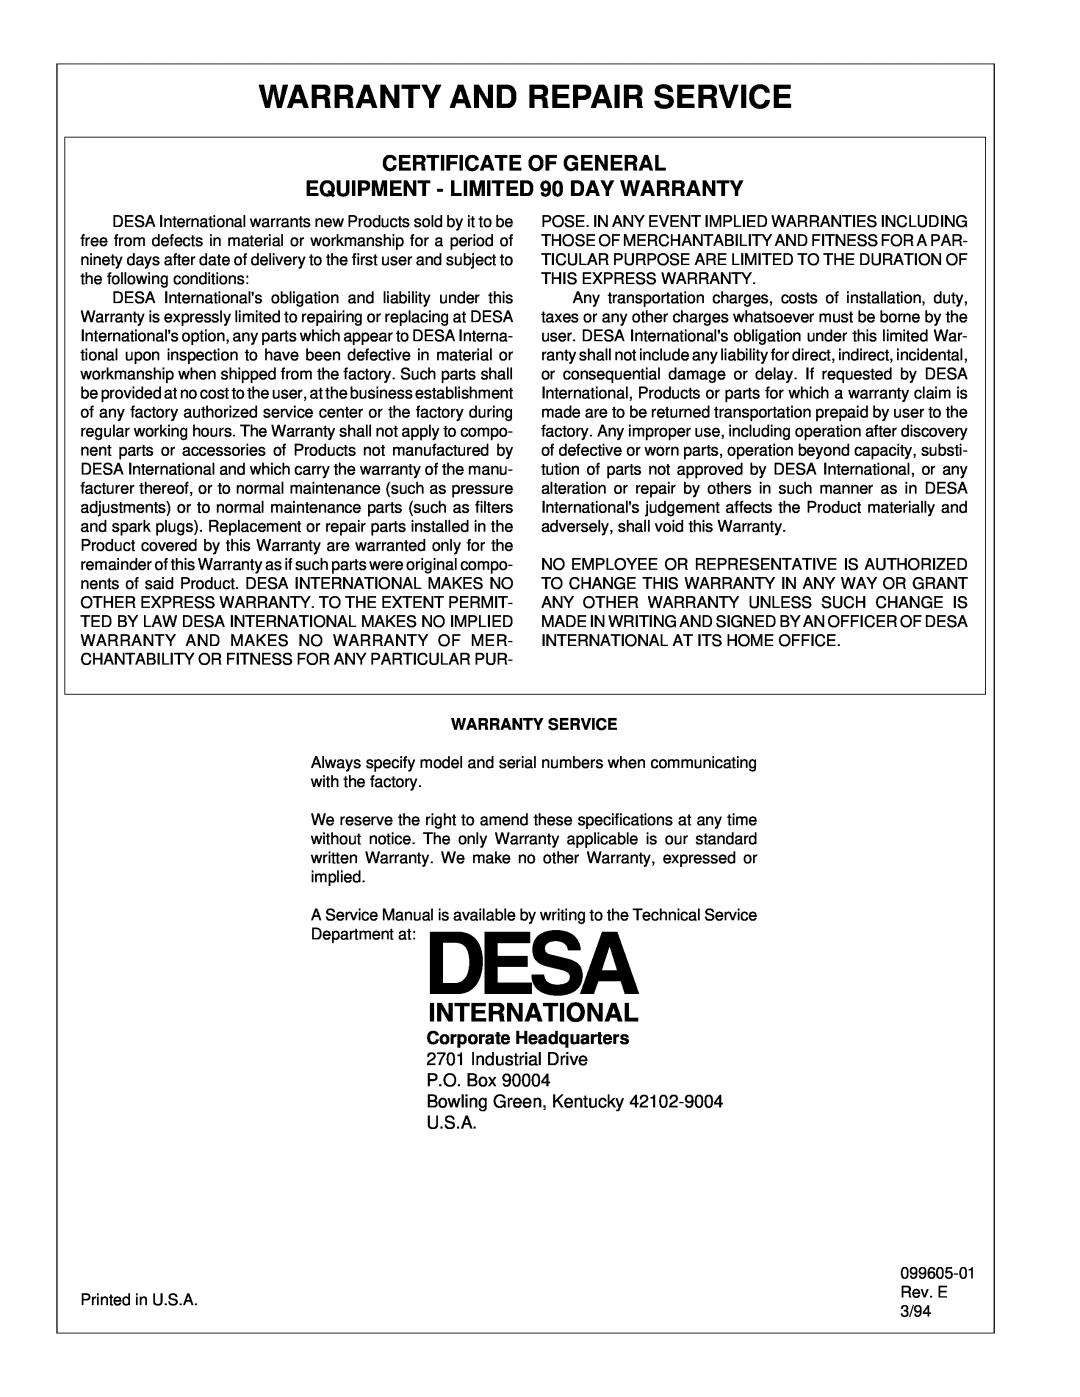 Desa H.S.I. Series owner manual Warranty And Repair Service, Certificate Of General, EQUIPMENT - LIMITED 90 DAY WARRANTY 